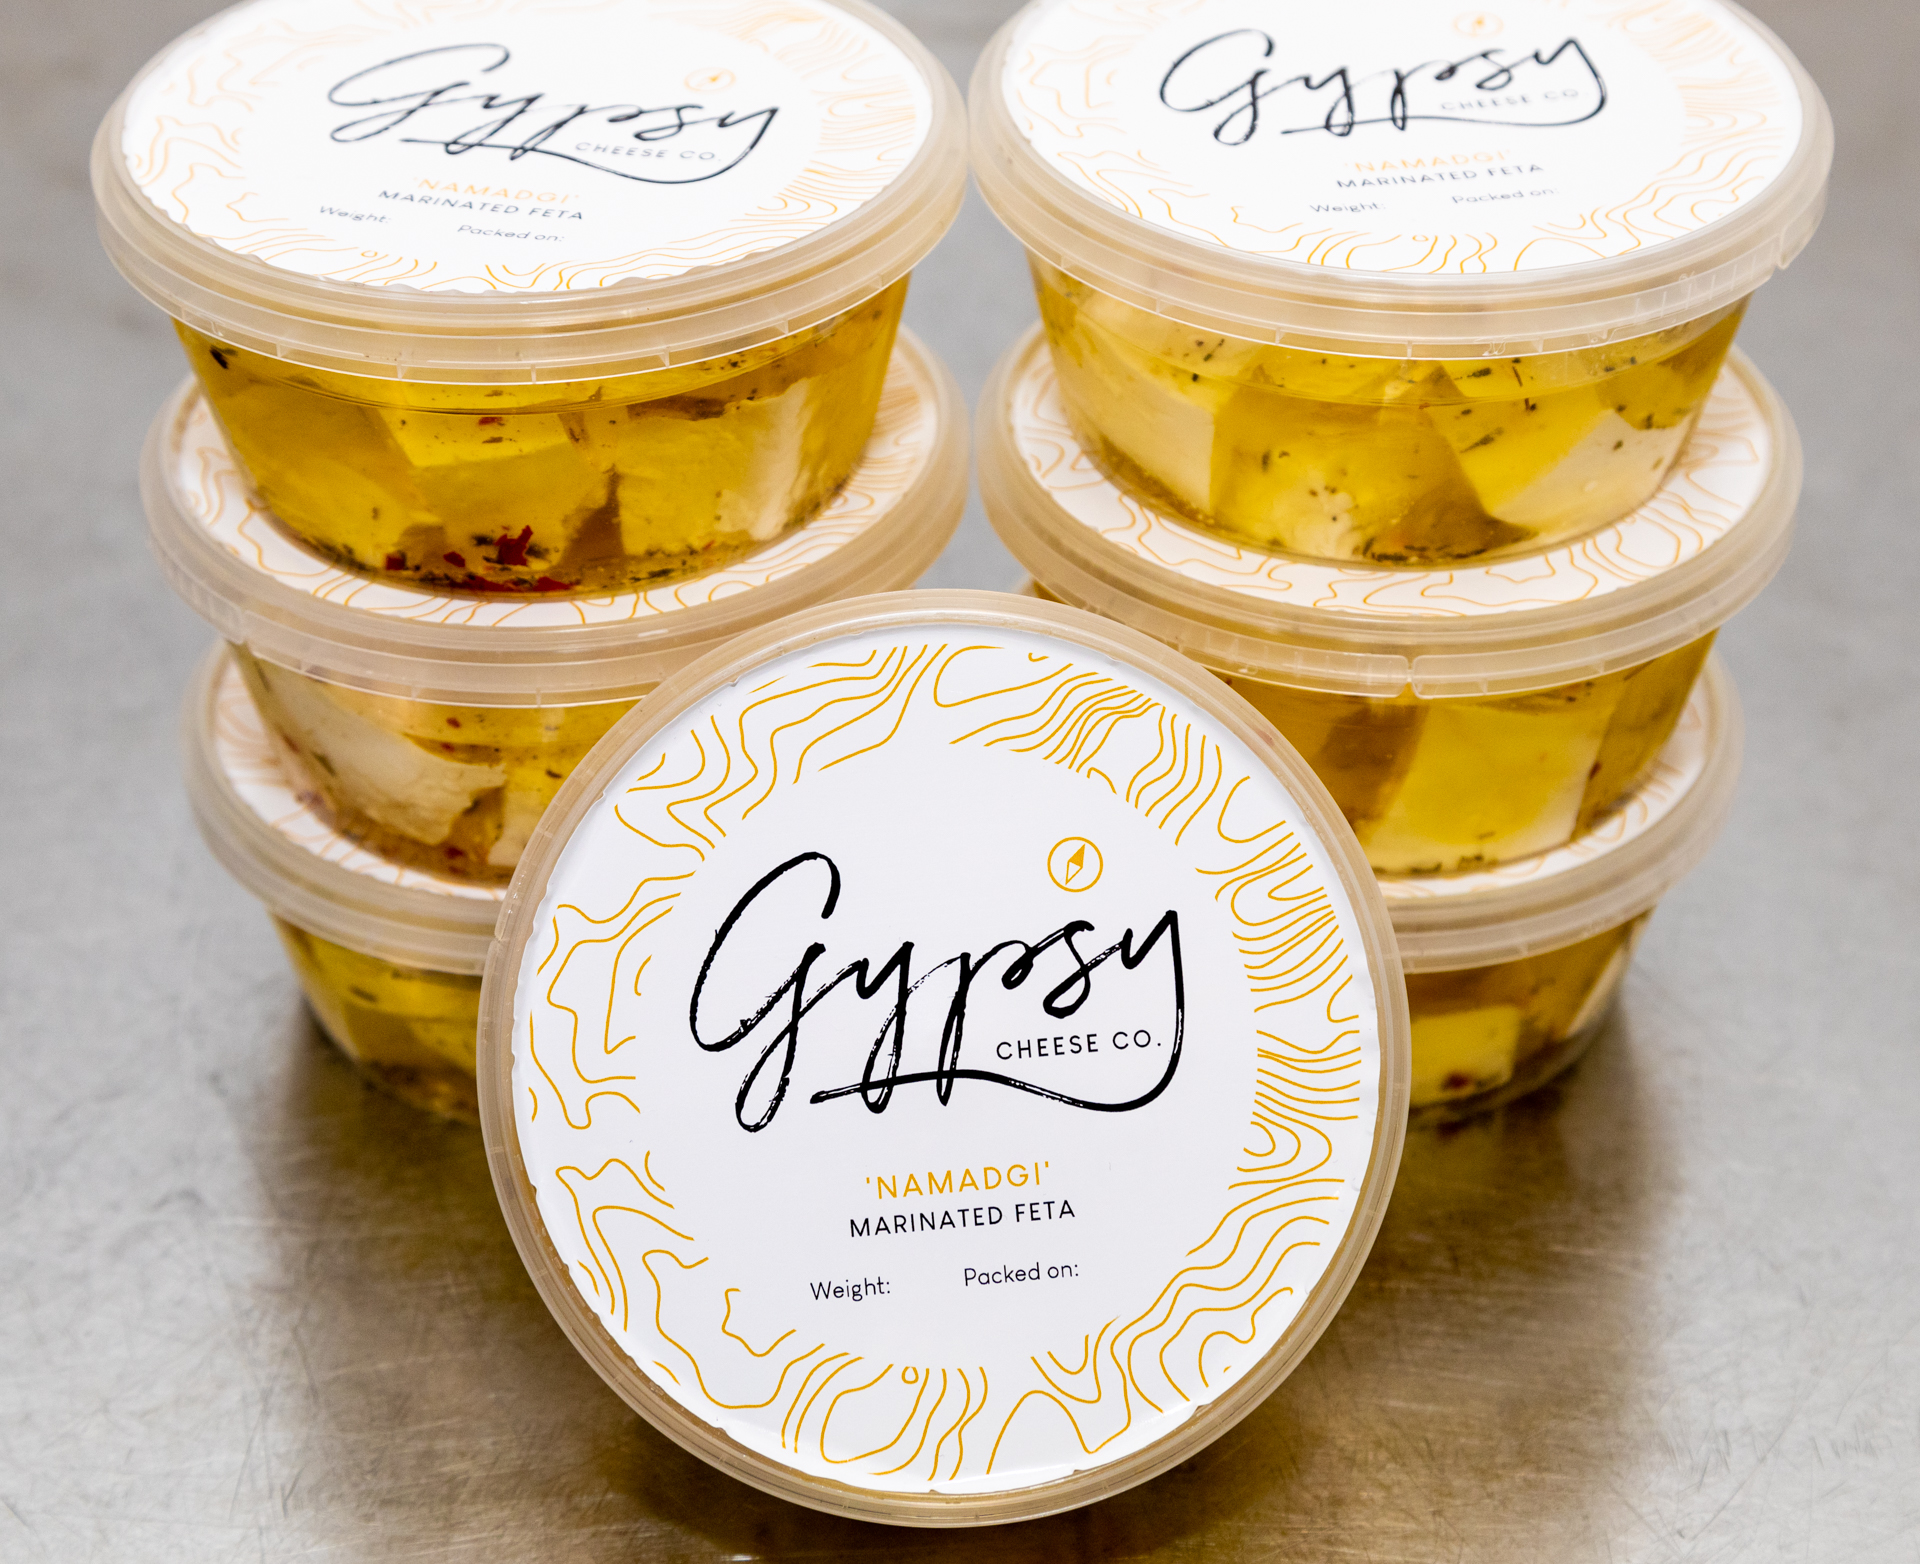 Meet the Makers: Canberra’s only cheese company Gypsy Cheese Co is breaking the ‘mould’